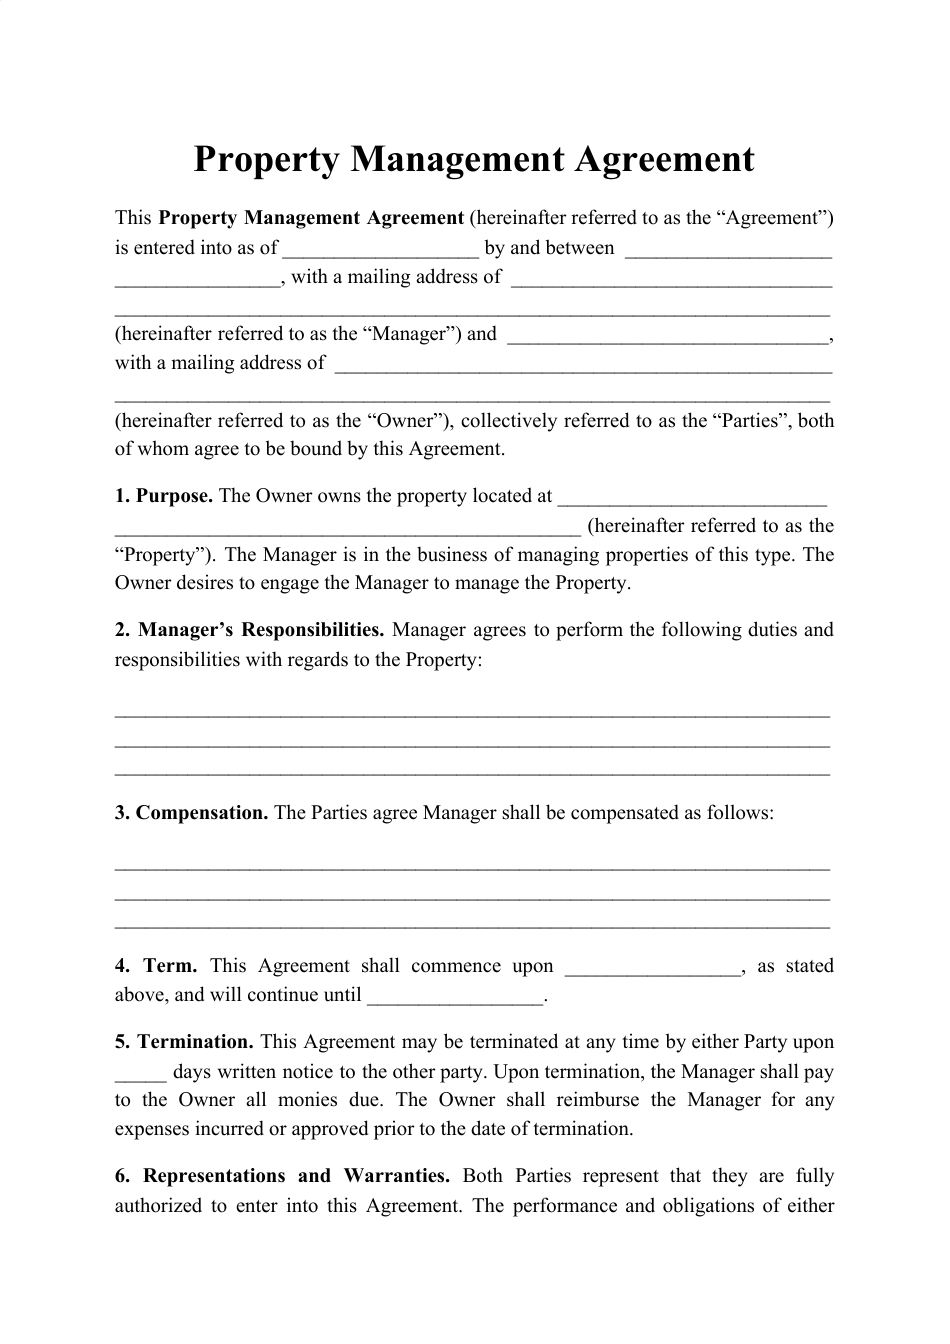 Property Management Agreement Template Fill Out, Sign Online and